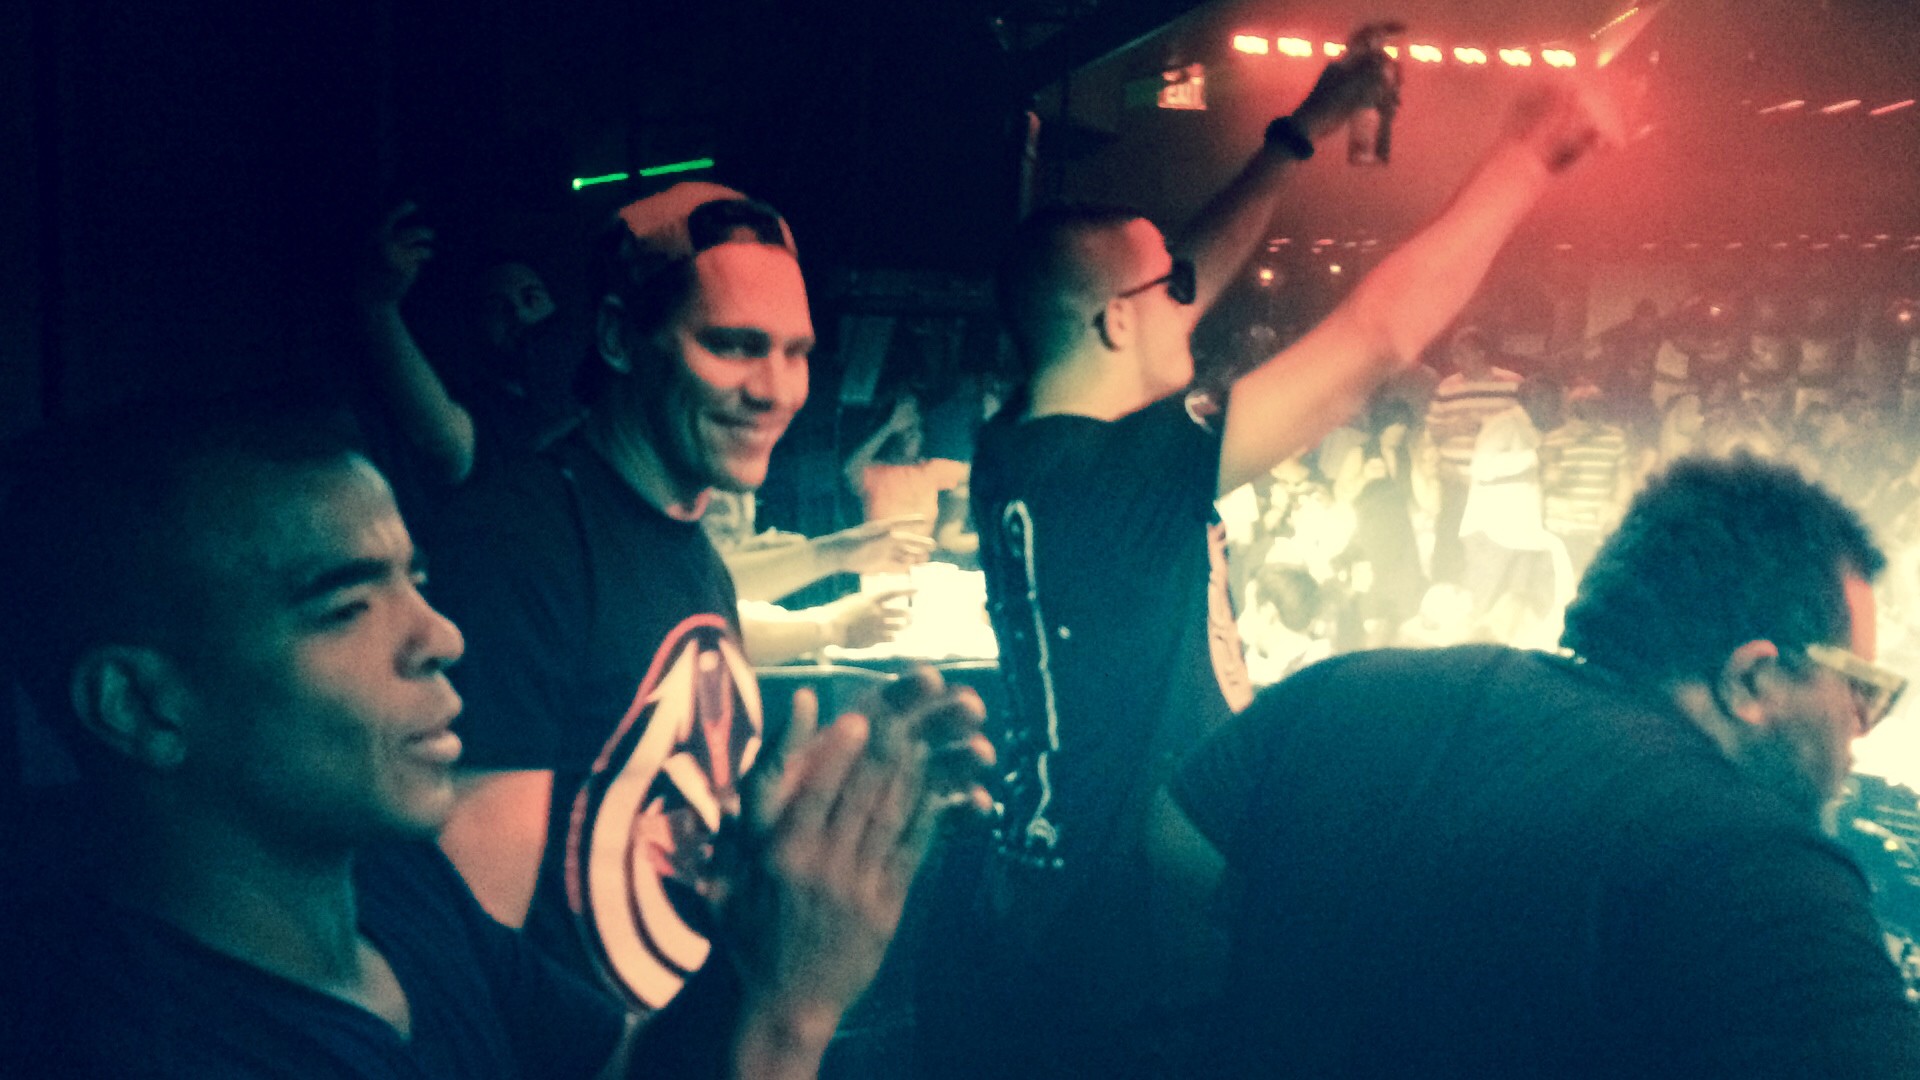 1920x1080 Tiesto (center) with fellow DJs Snake, Erick Morillo and Carnage